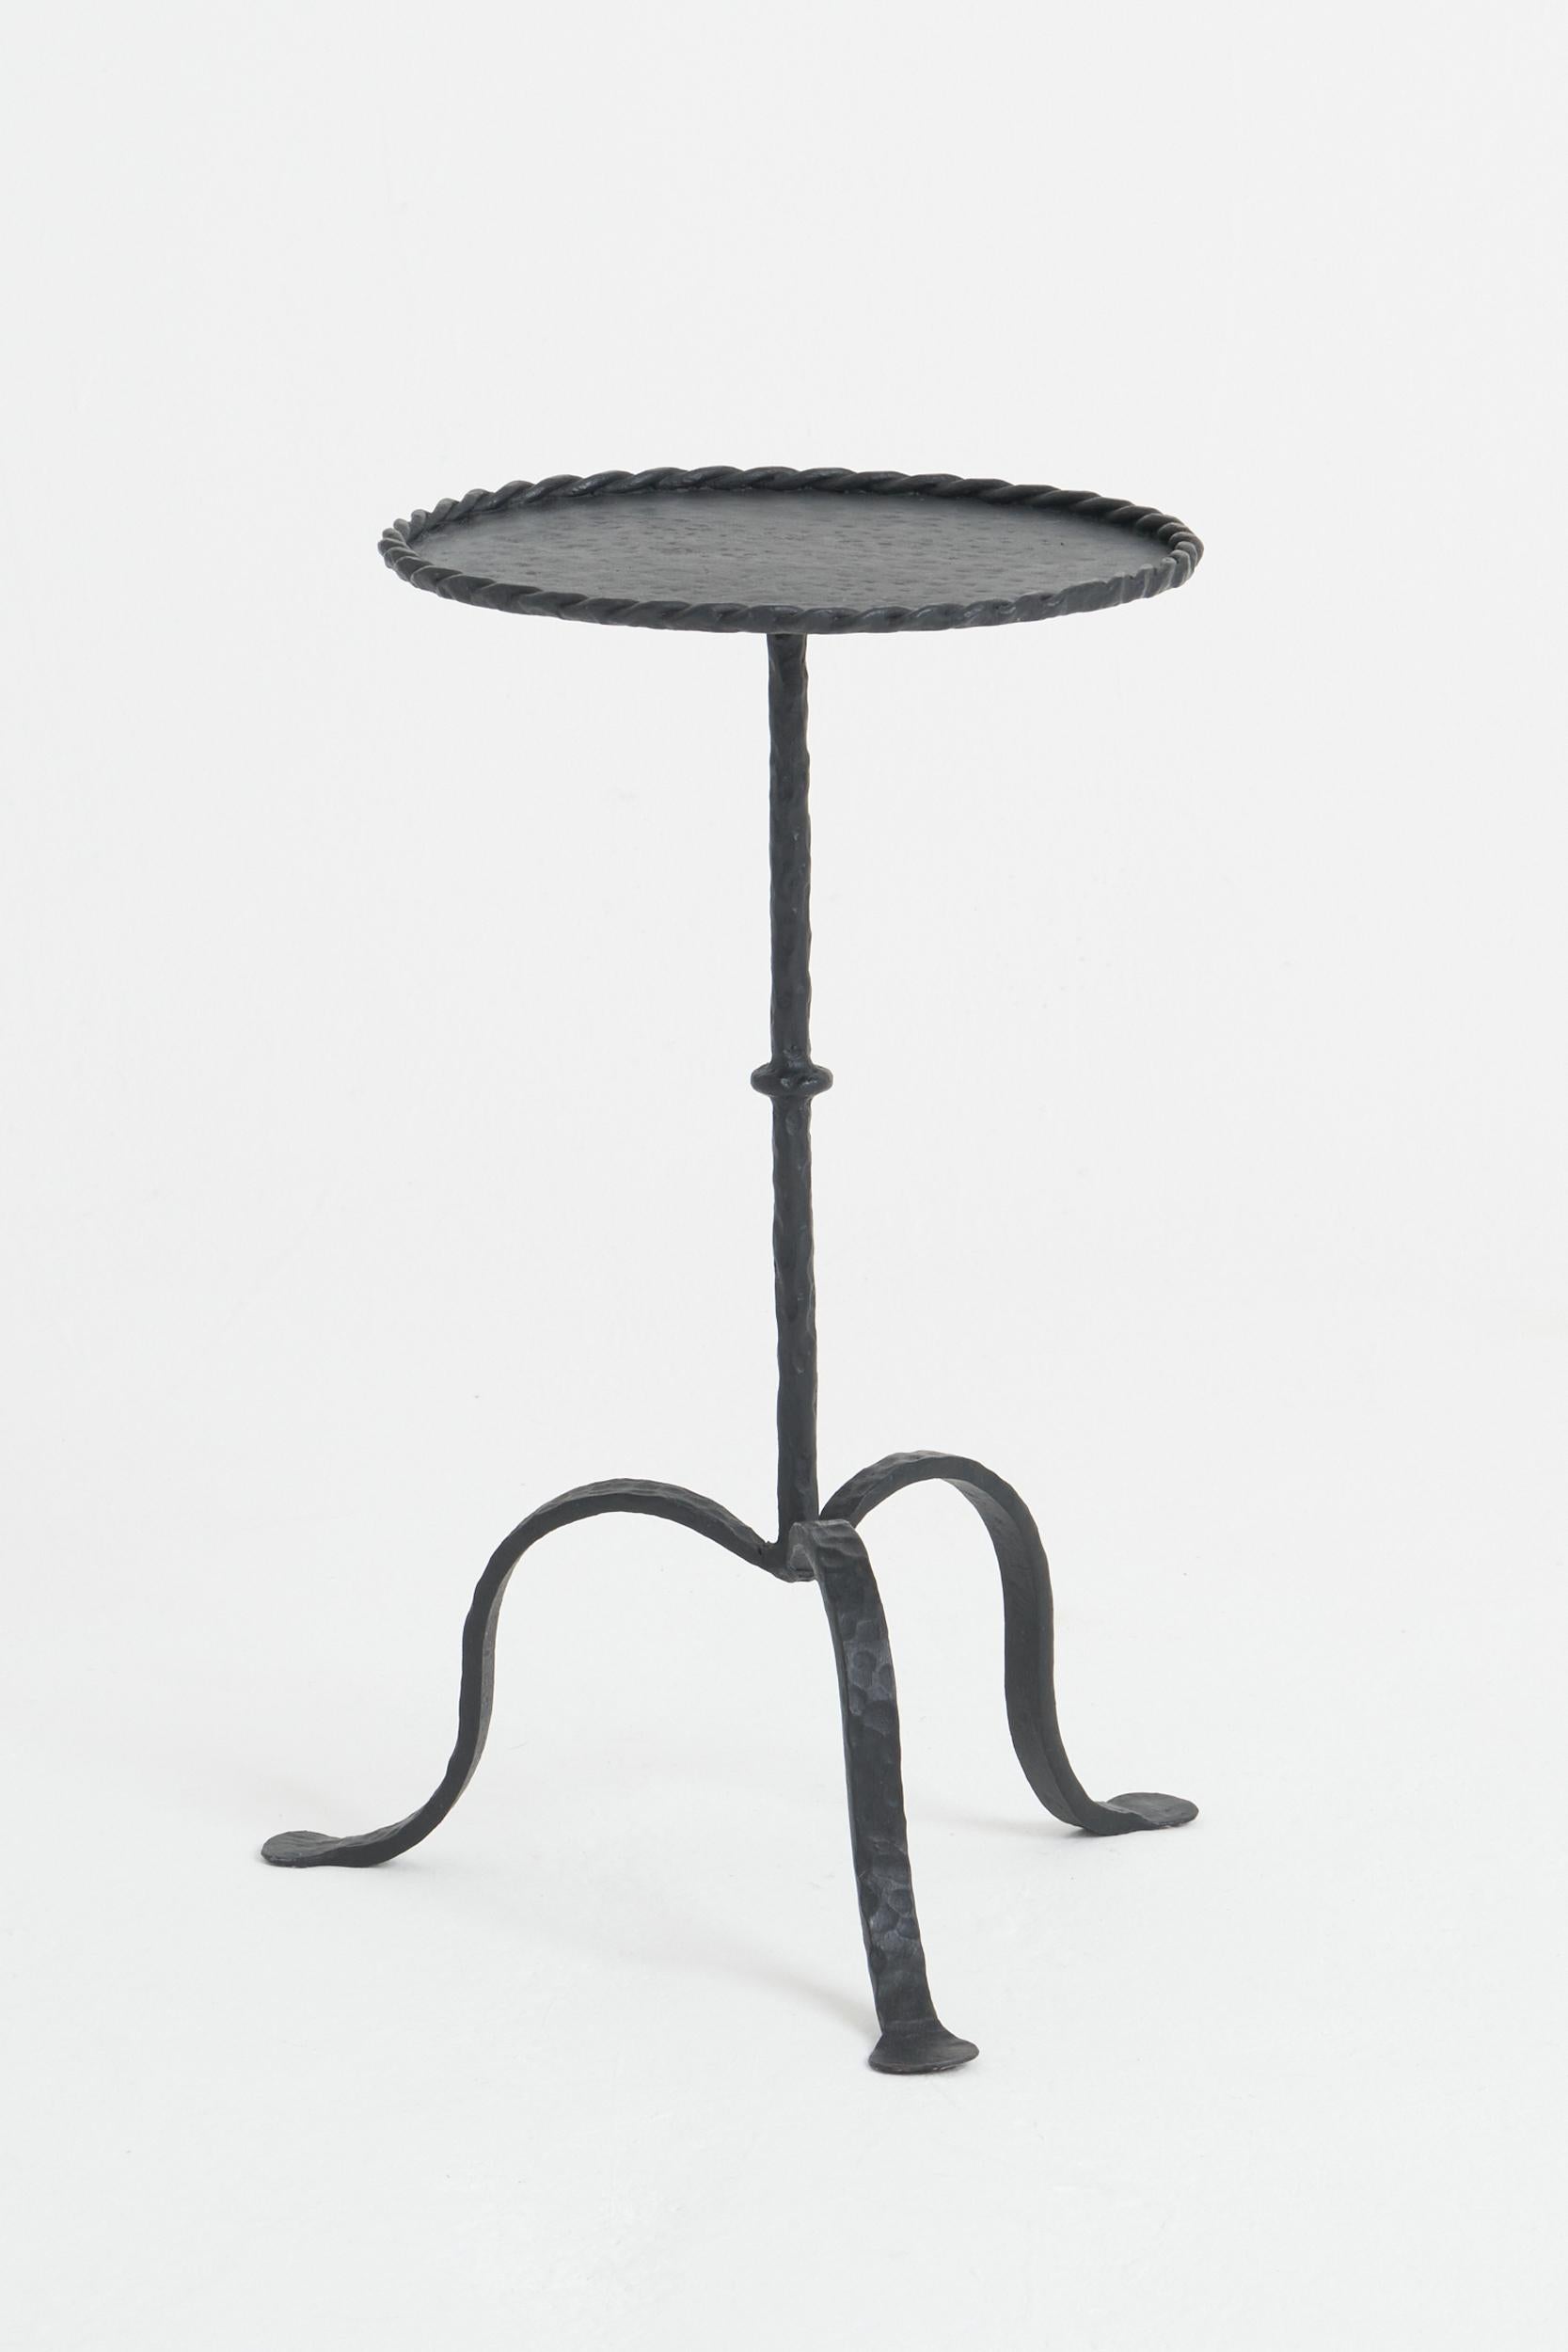 A black patinated wrought iron martini table, with a twisted rope edge.
Spain, Mid-20th Century
55 cm high by 32 cm diameter.